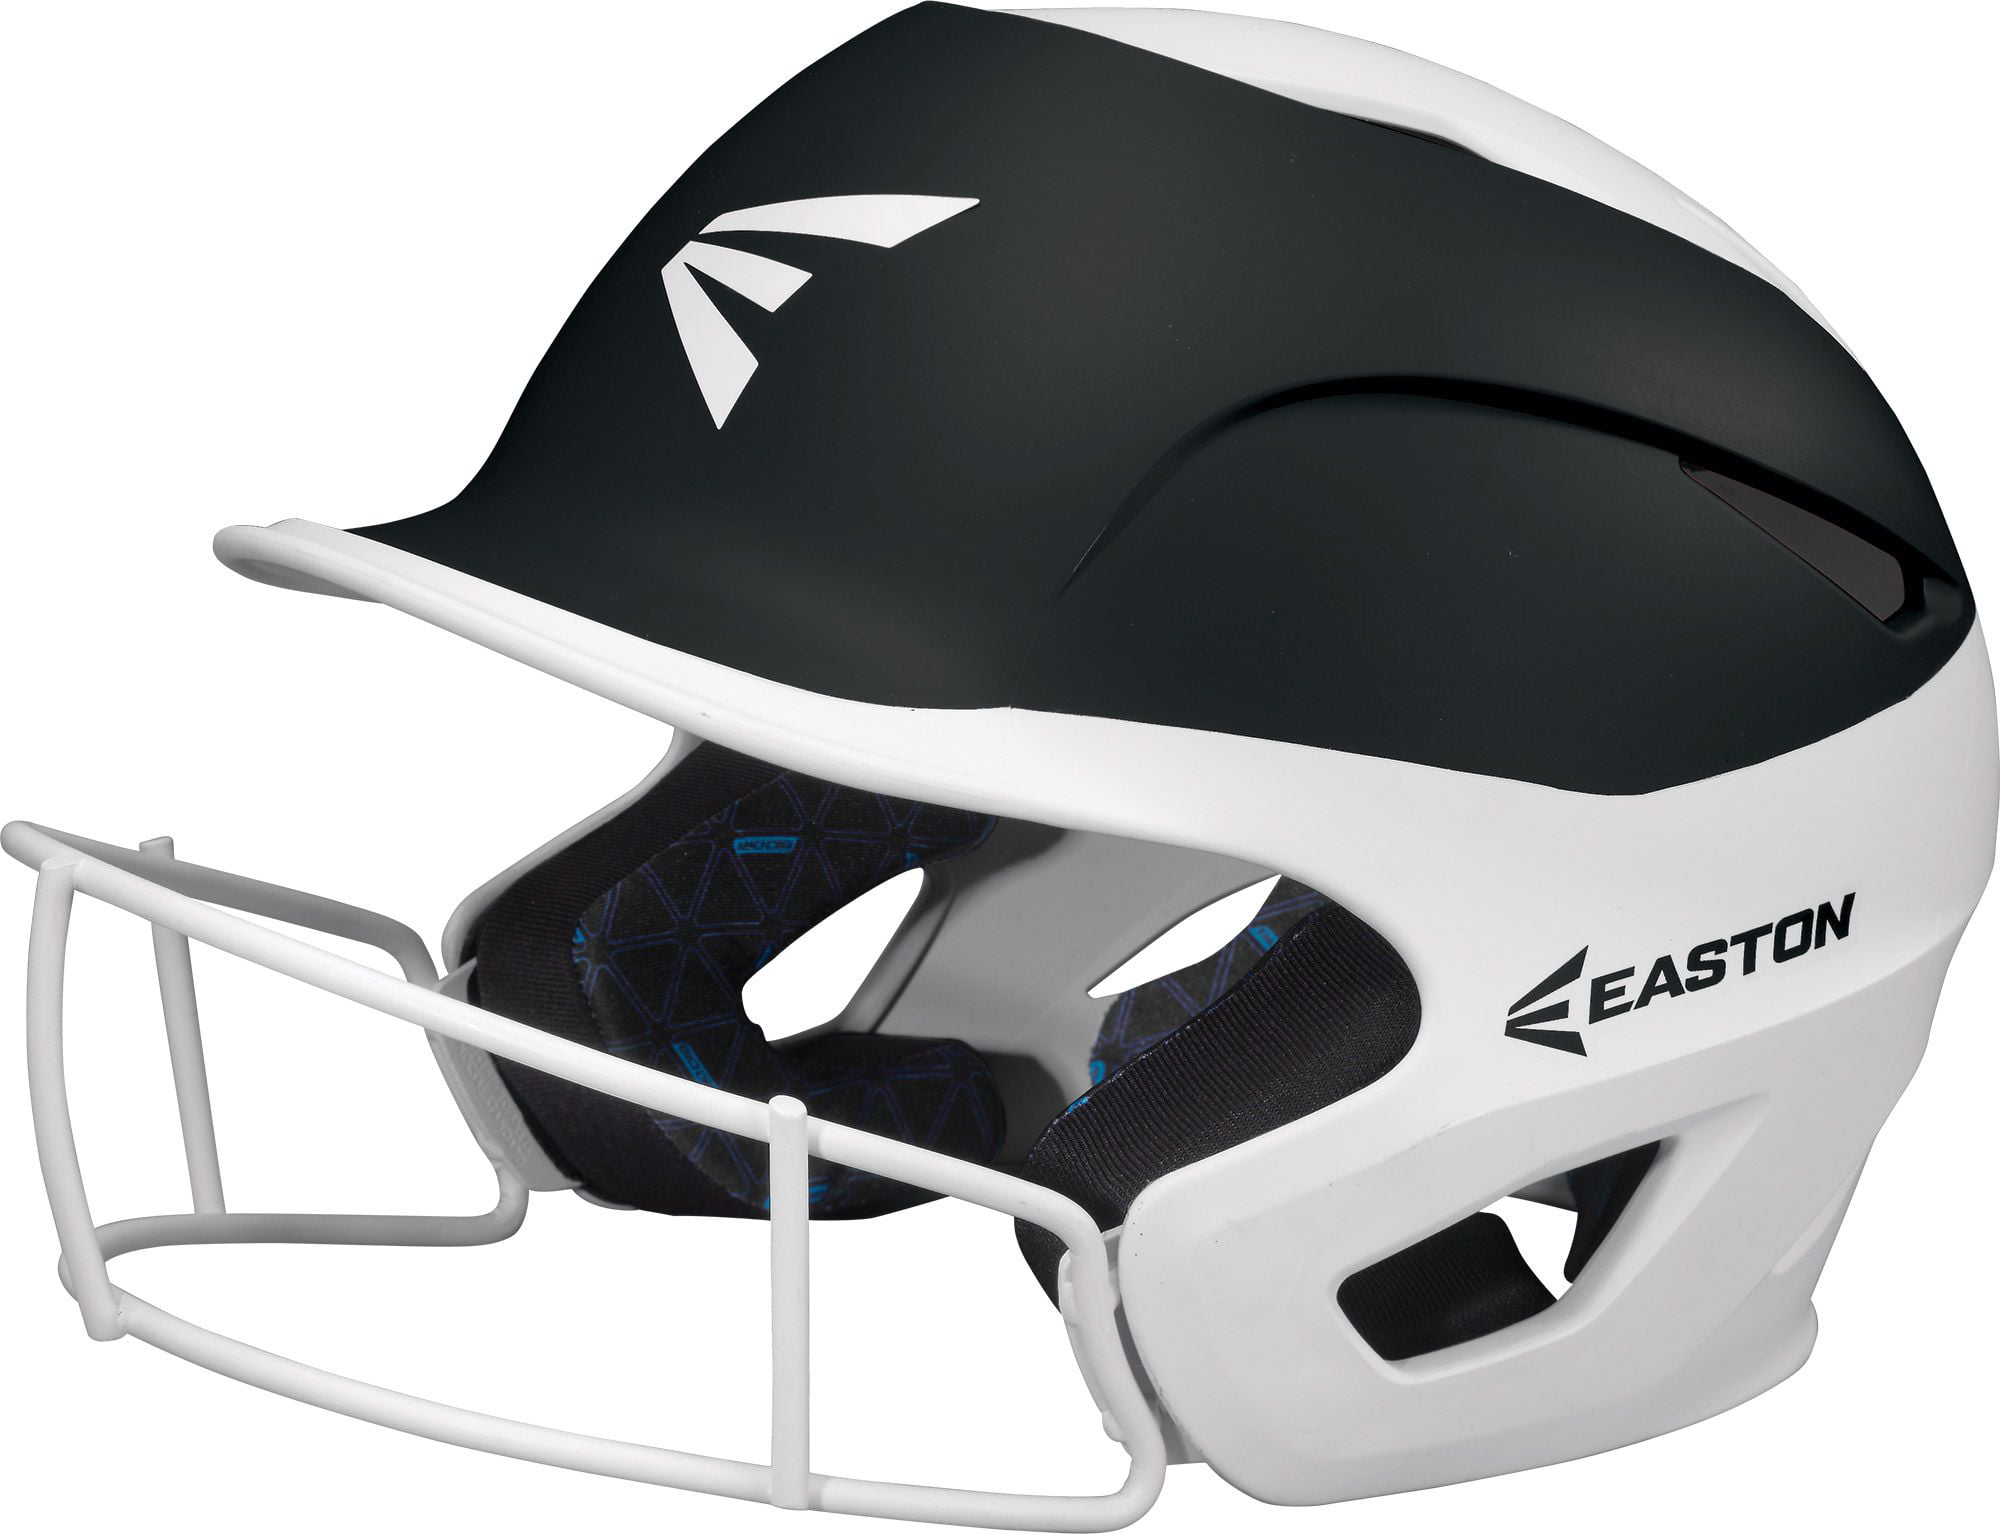 Easton PROWESS Fastpitch Softball Batting Helmet with Mask